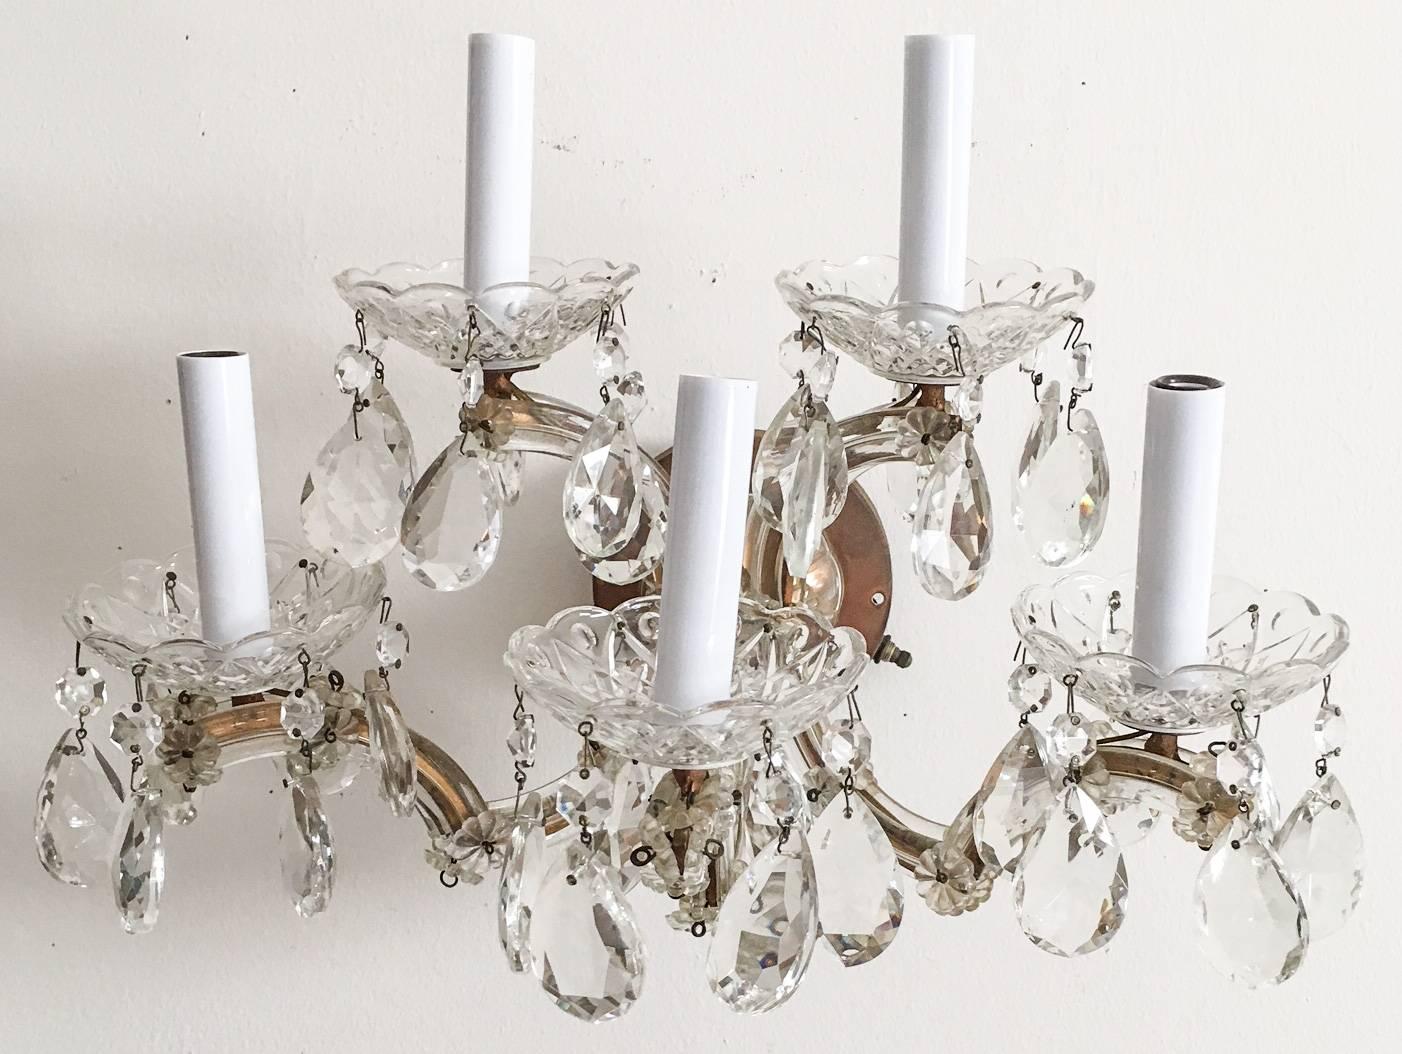 Exquisite pair of 1940s Italian brass and crystal electric wall sconces with original bobeches and candle cups. The body of the sconce has aged to a wonderful warm aged brass finish. Both sconces attach to the wall plate with two screws (not